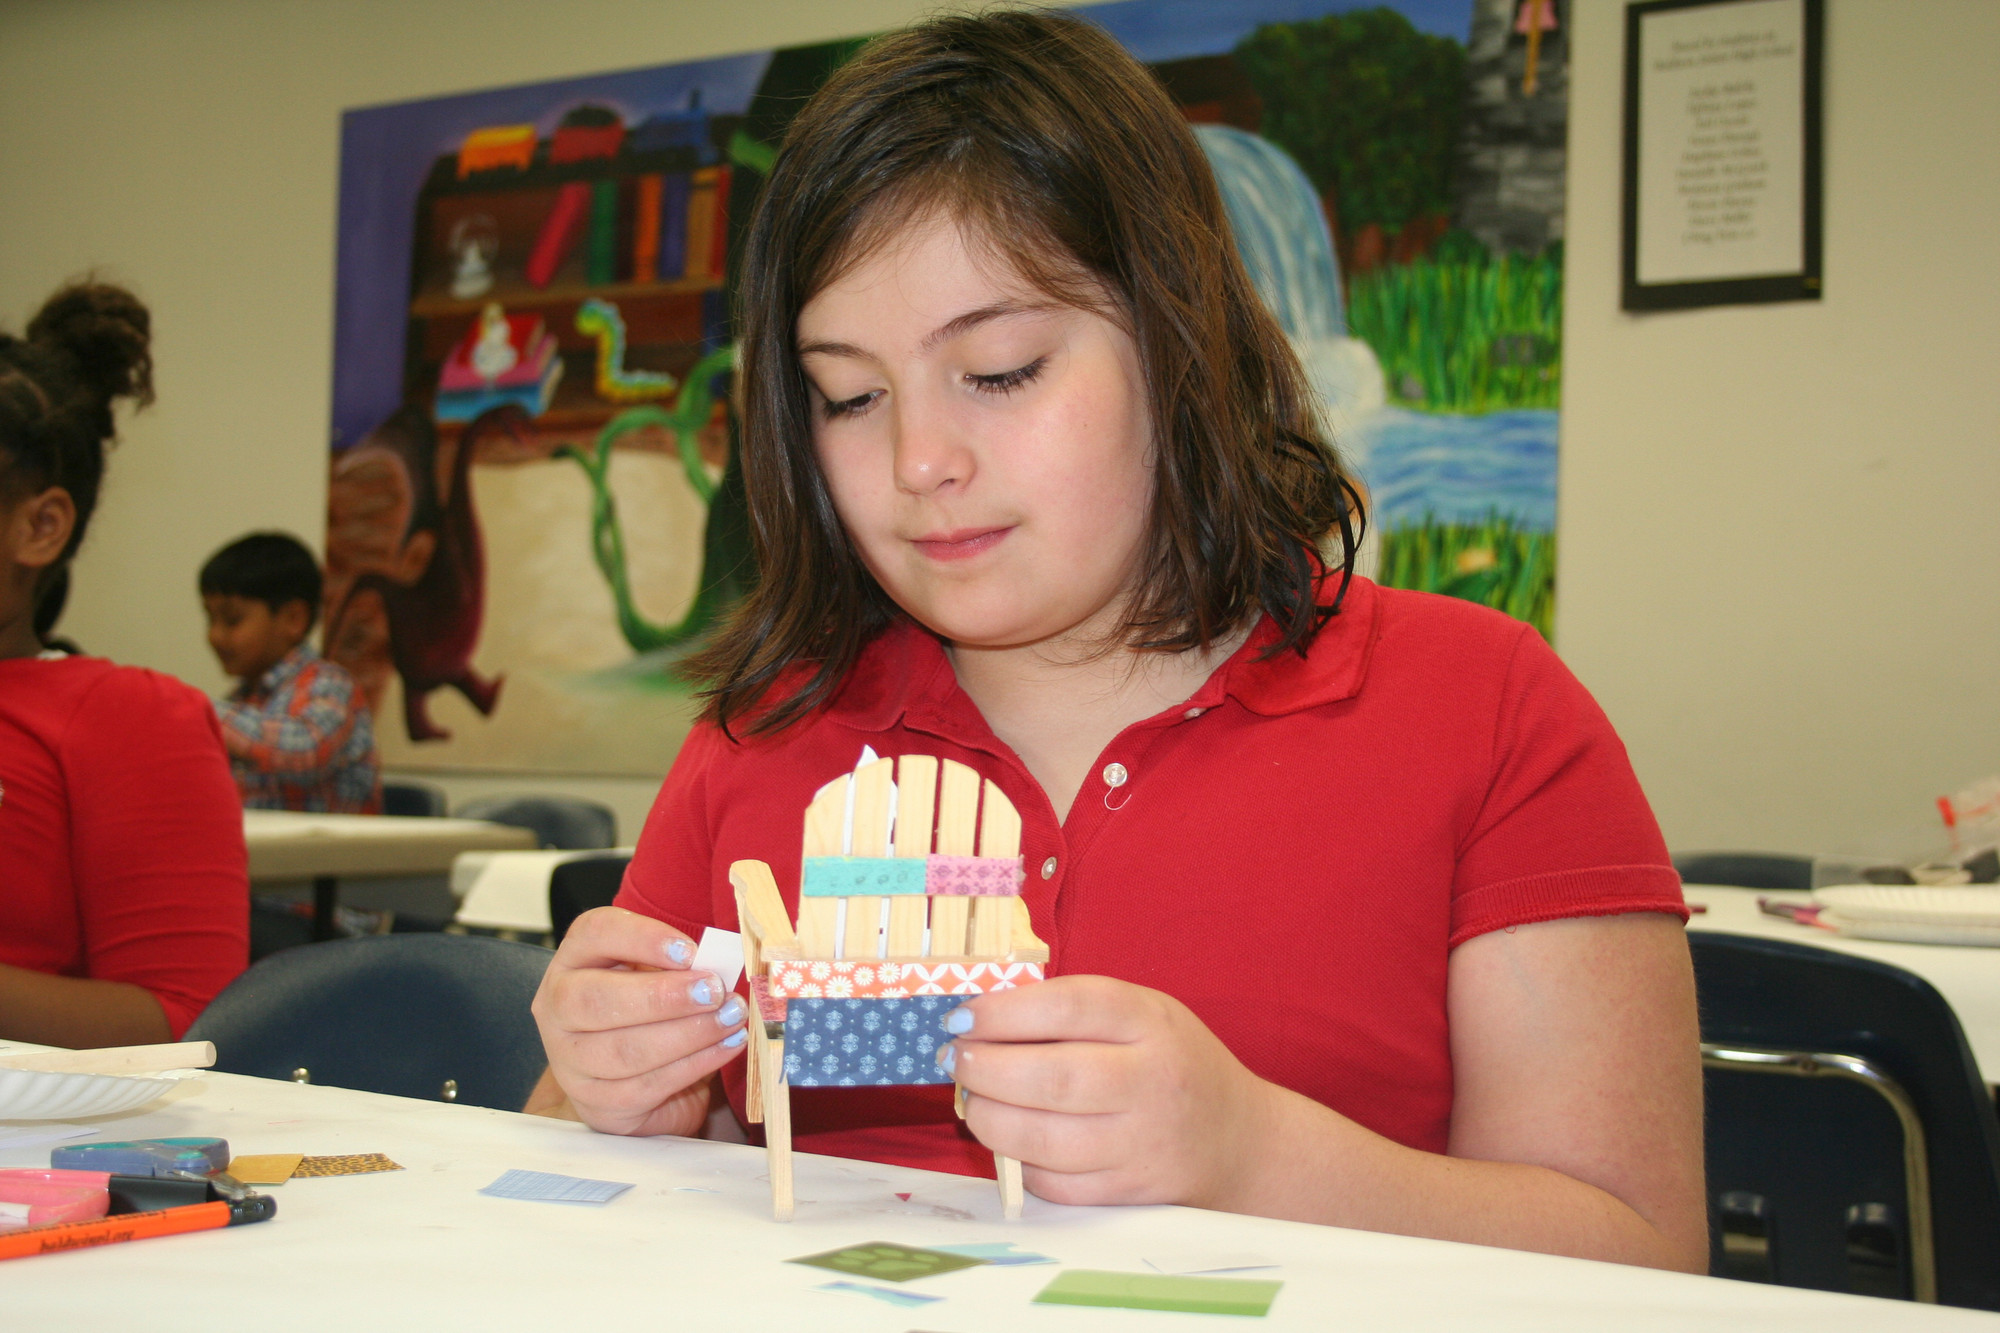 Arianna Rogers, 10, glued decorated paper to the tiny wooden lawn chair.